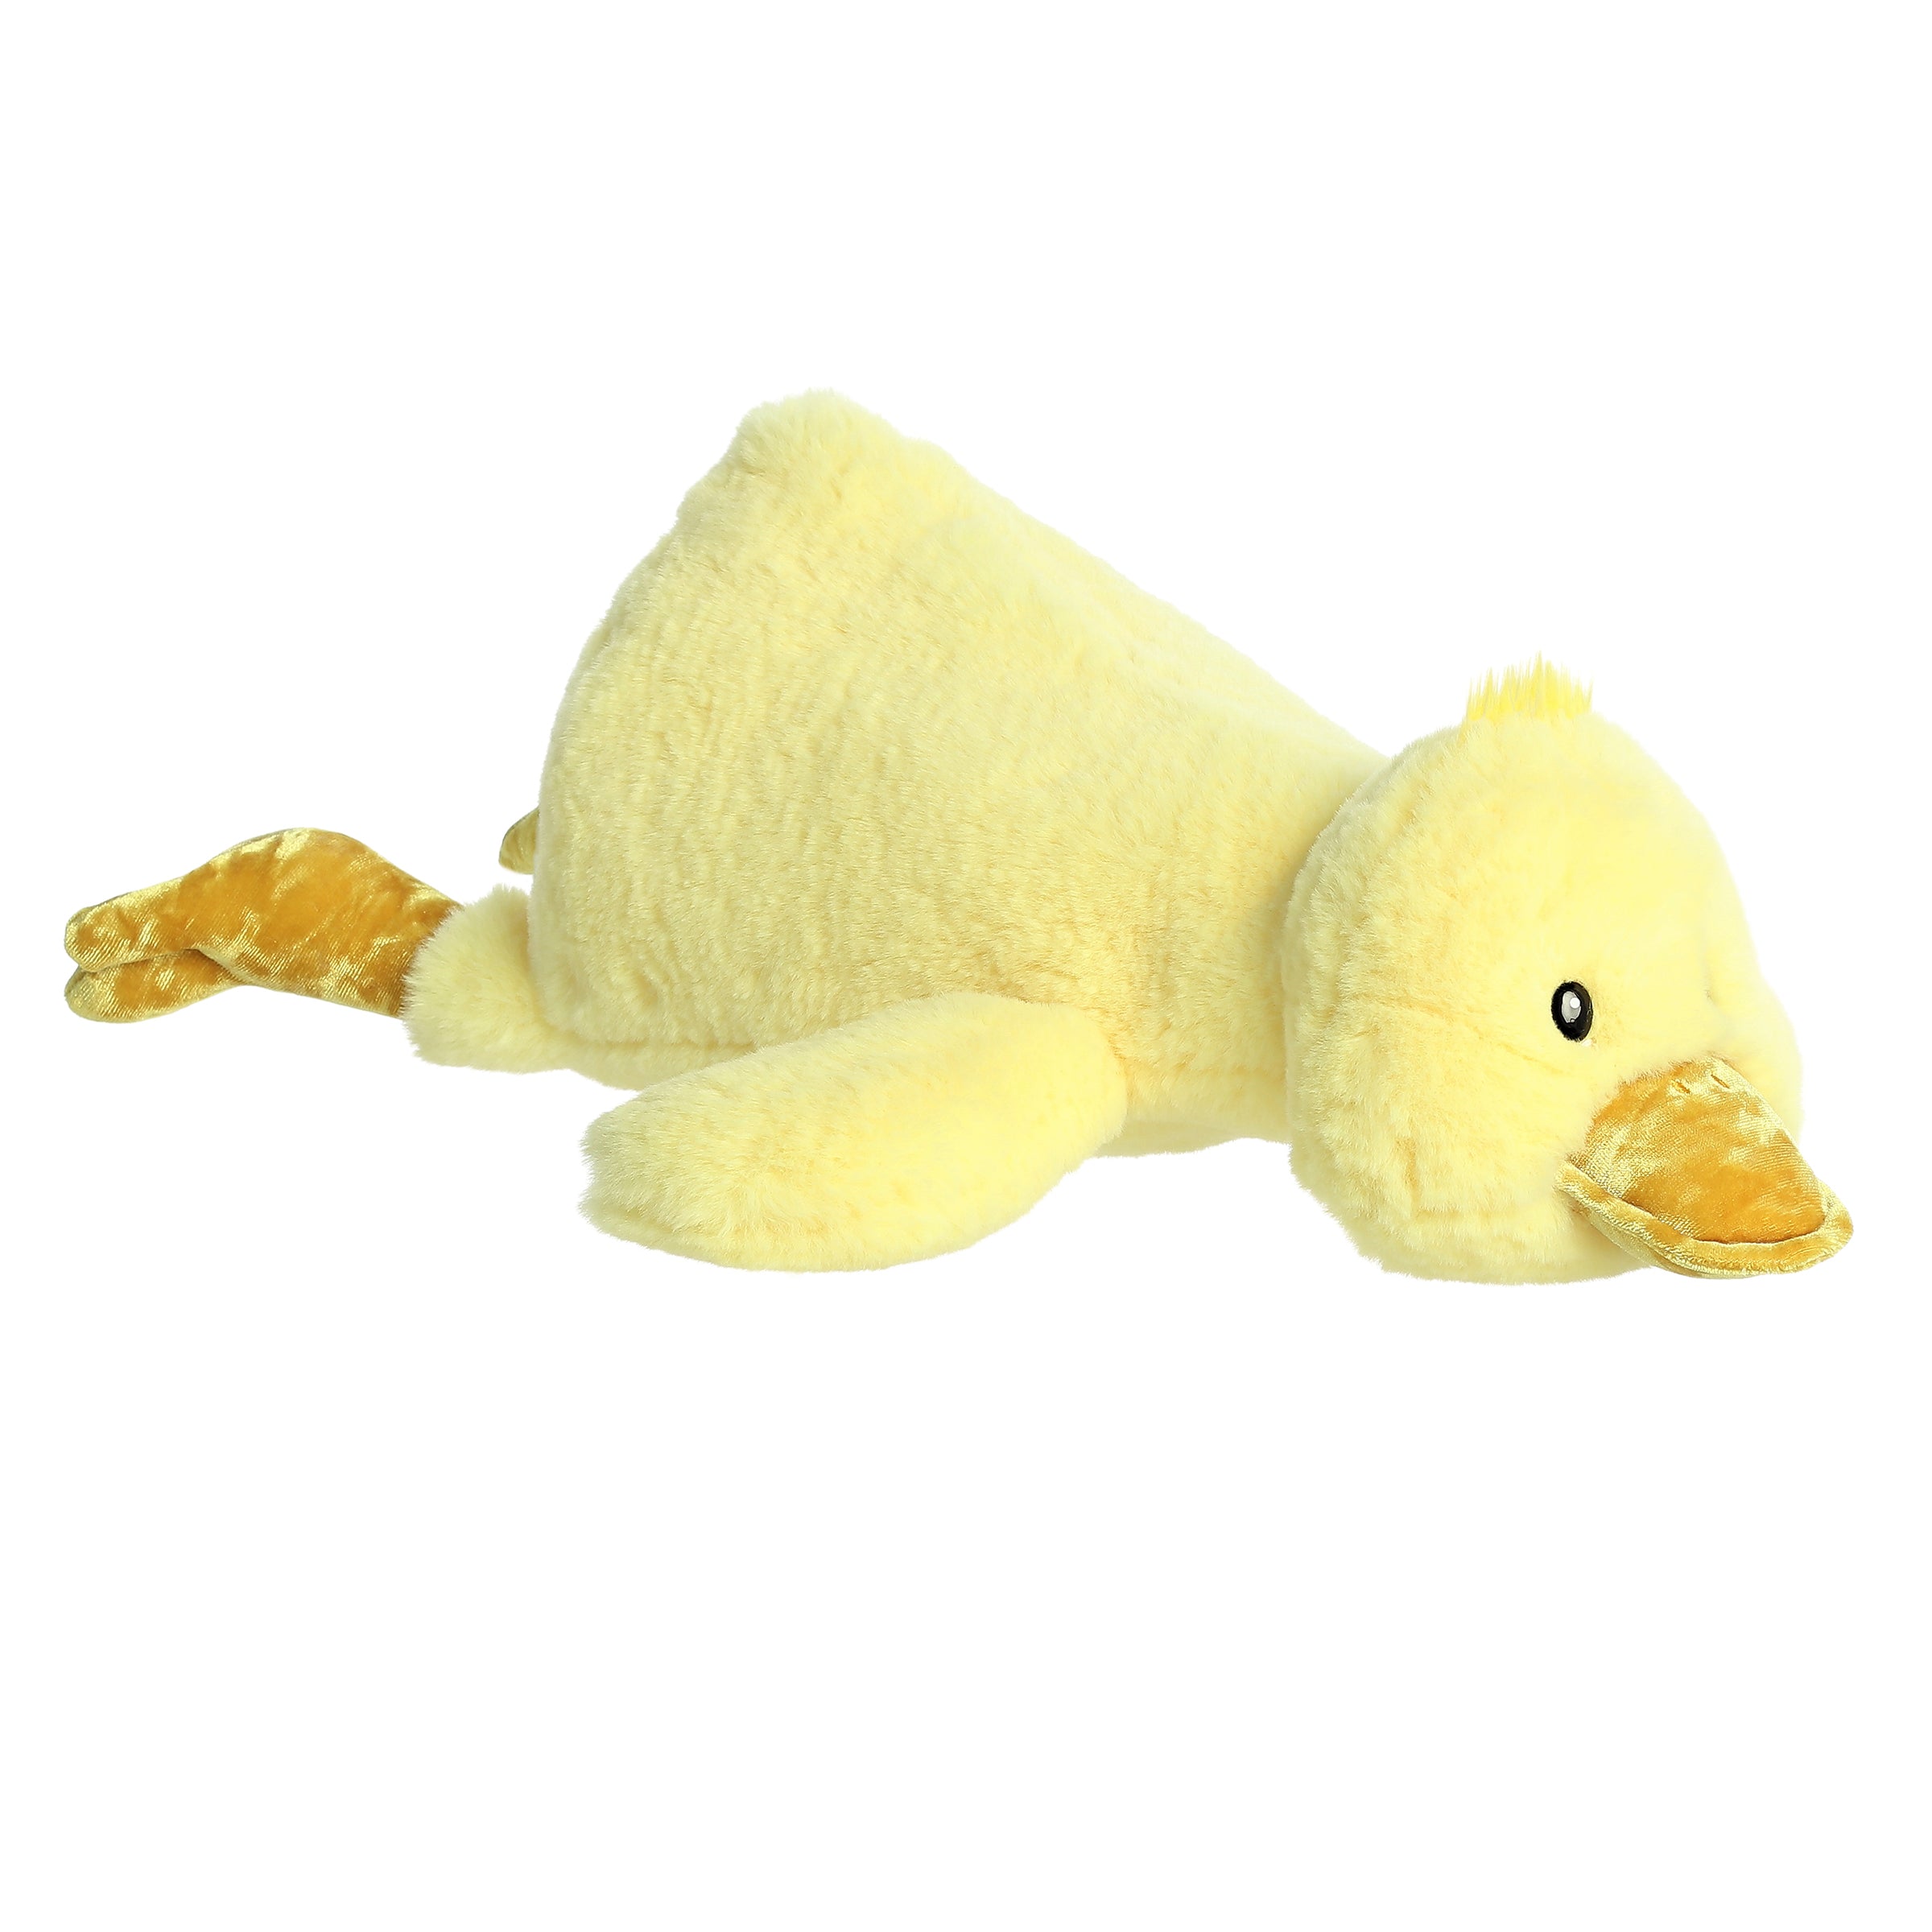 Snoozles Duck Plush from Aurora, soft yellow fabric, designed for comfort, and ideal as a sleeping buddy